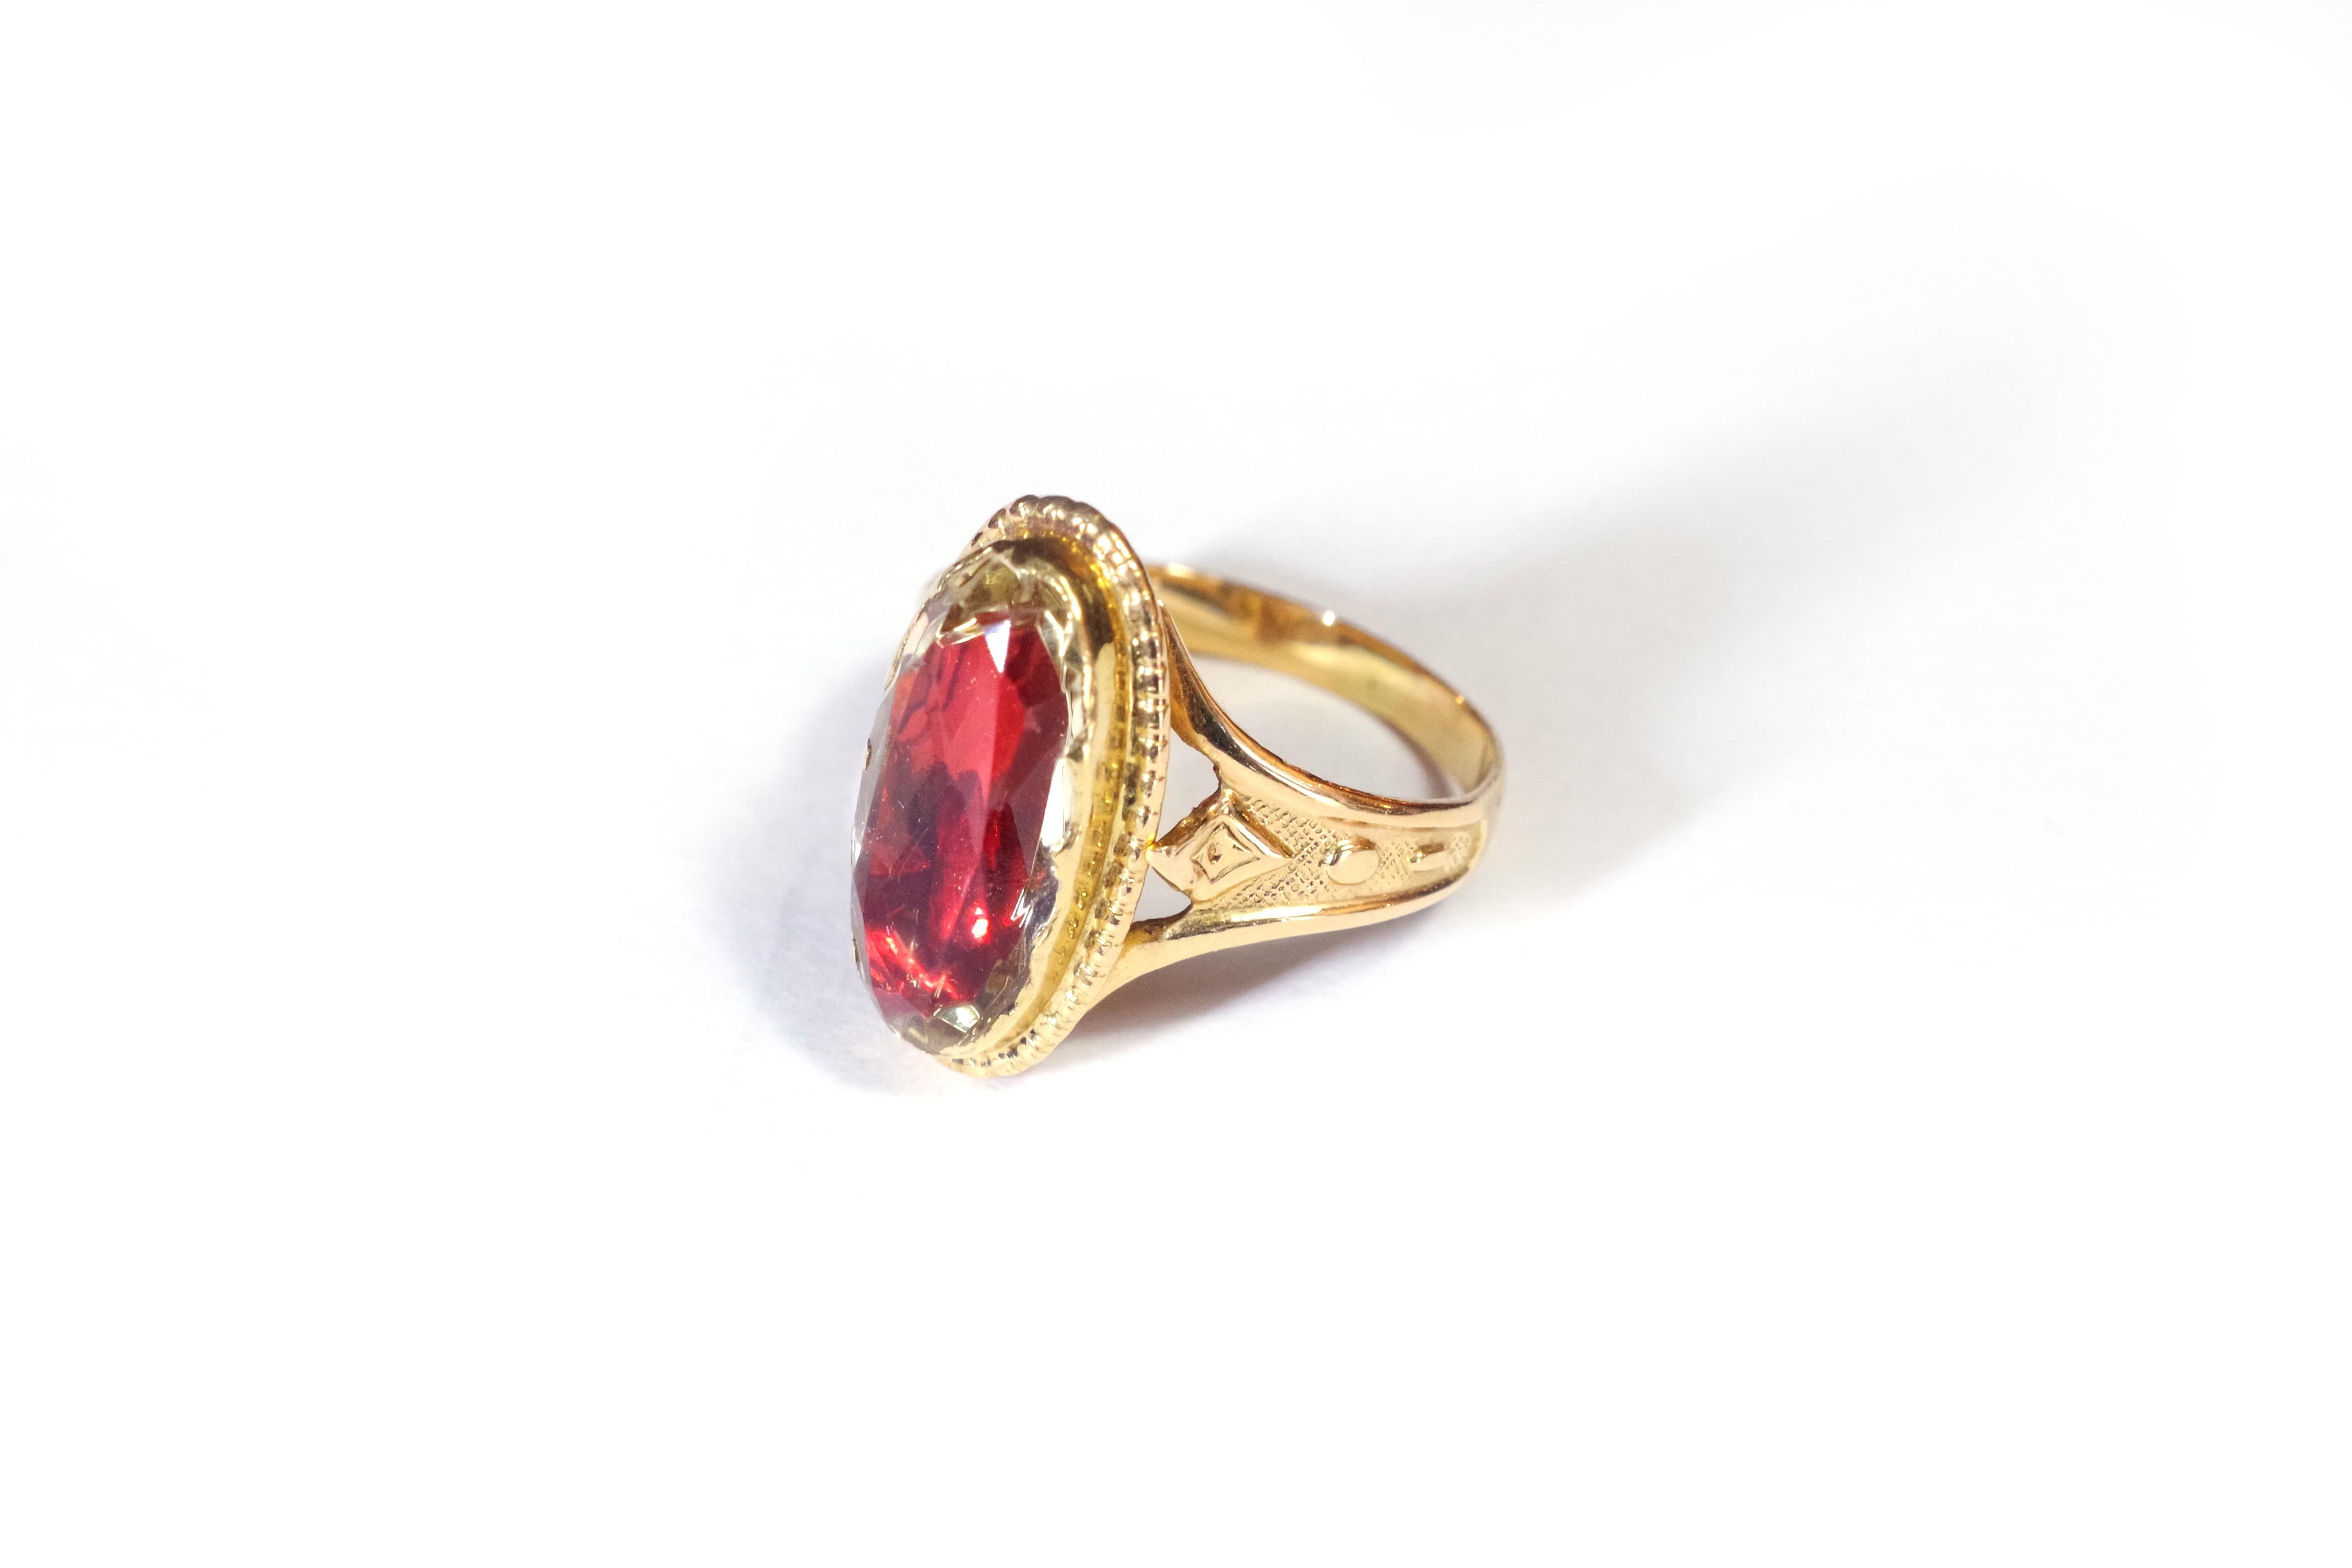 Late Victorian French Regional Citrine Ring in 18k Gold, Catalan Ring